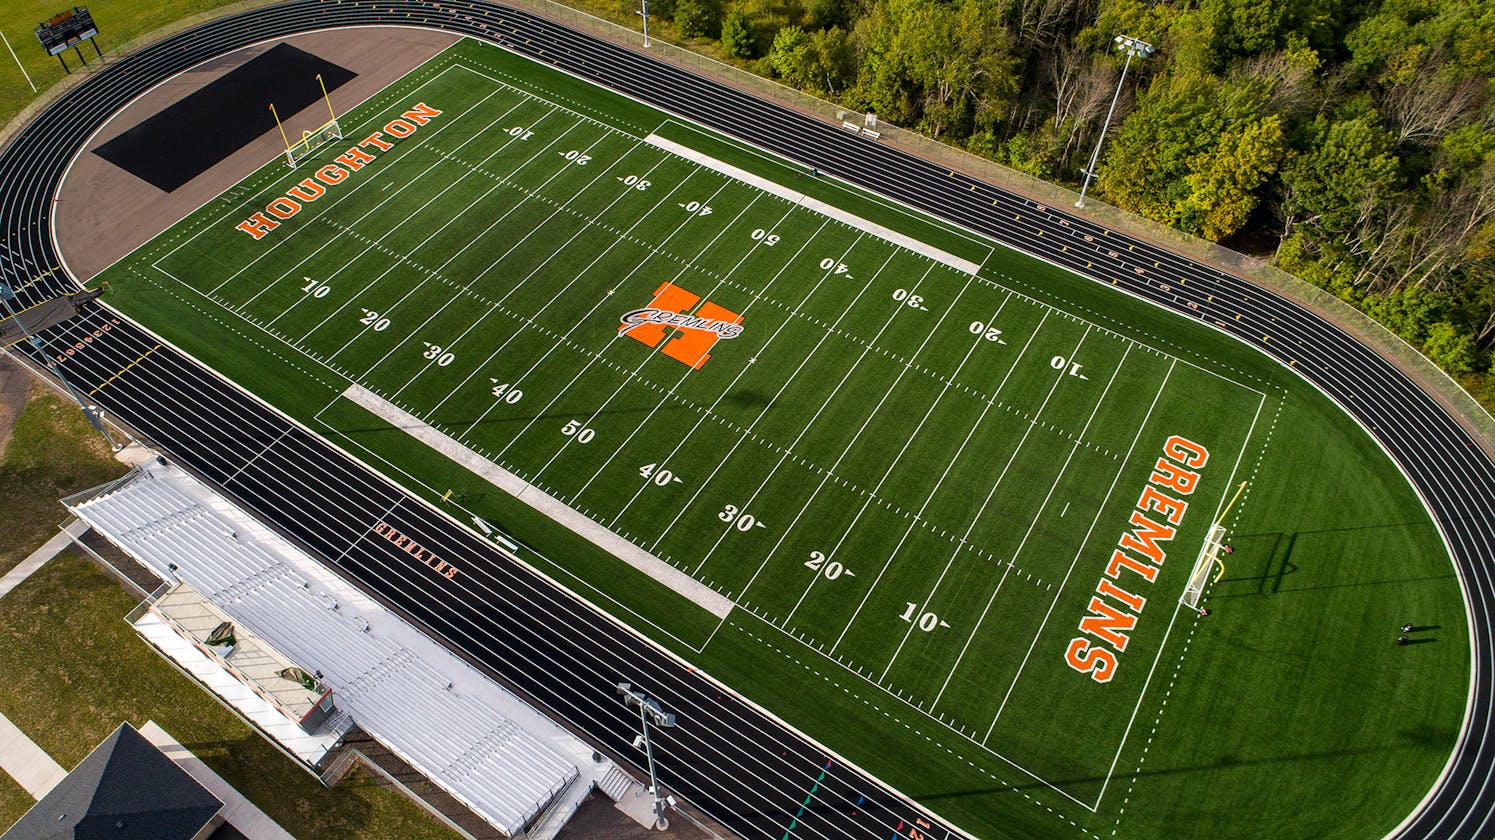 Houghton High School football field and outdoor track